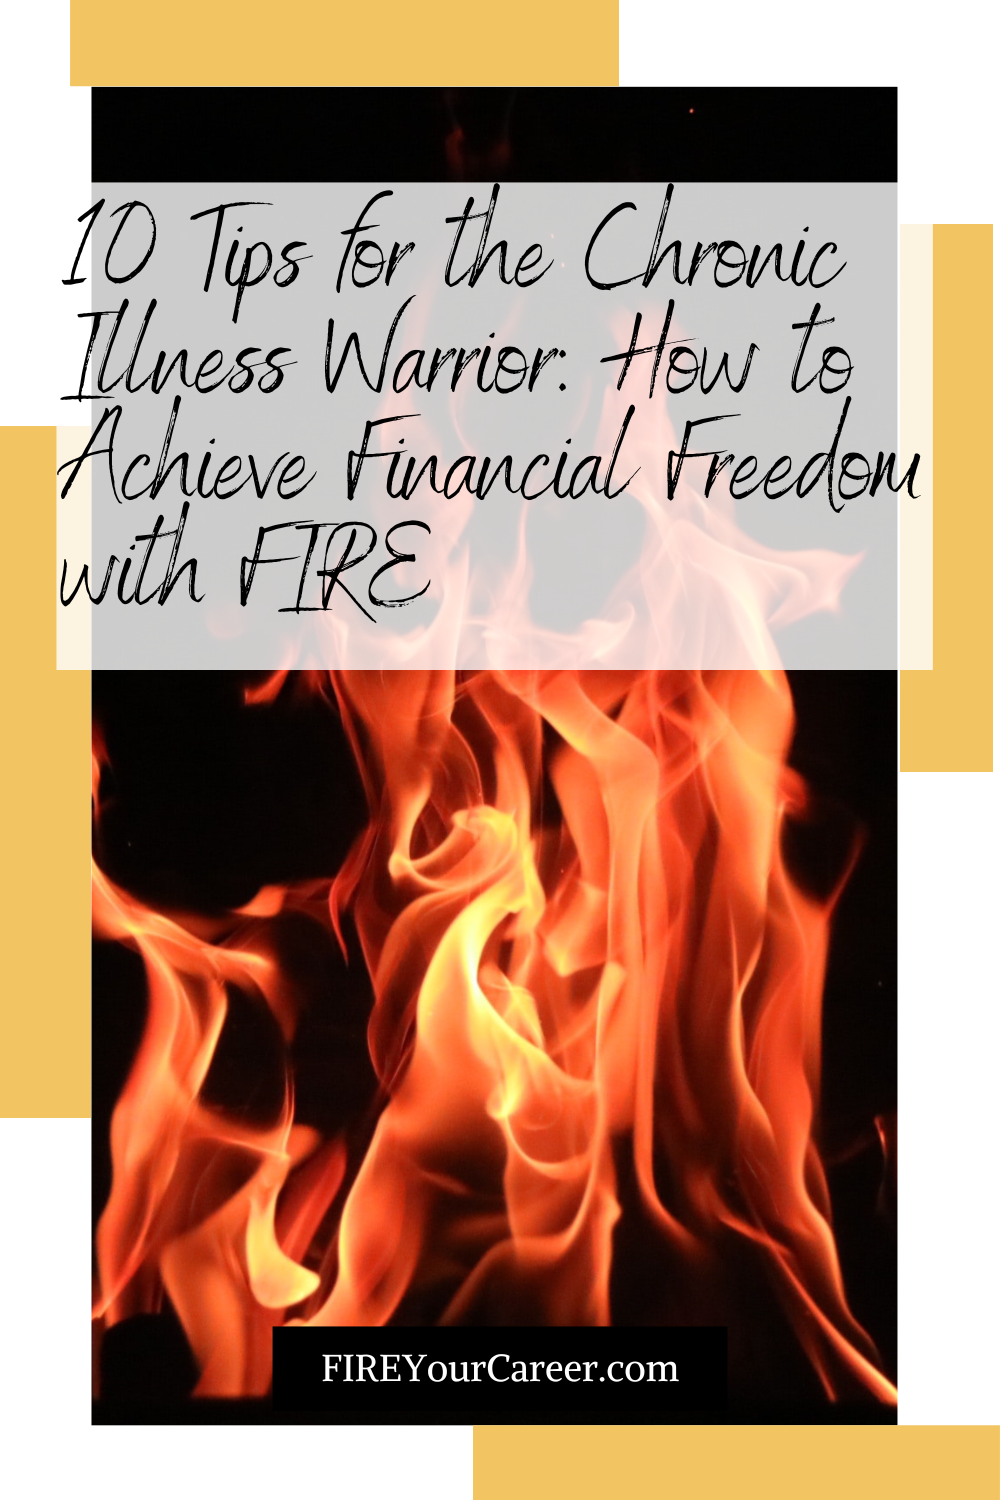 10 Tips for the Chronic Illness Warrior How to Achieve Financial Freedom with FIRE Pinterest